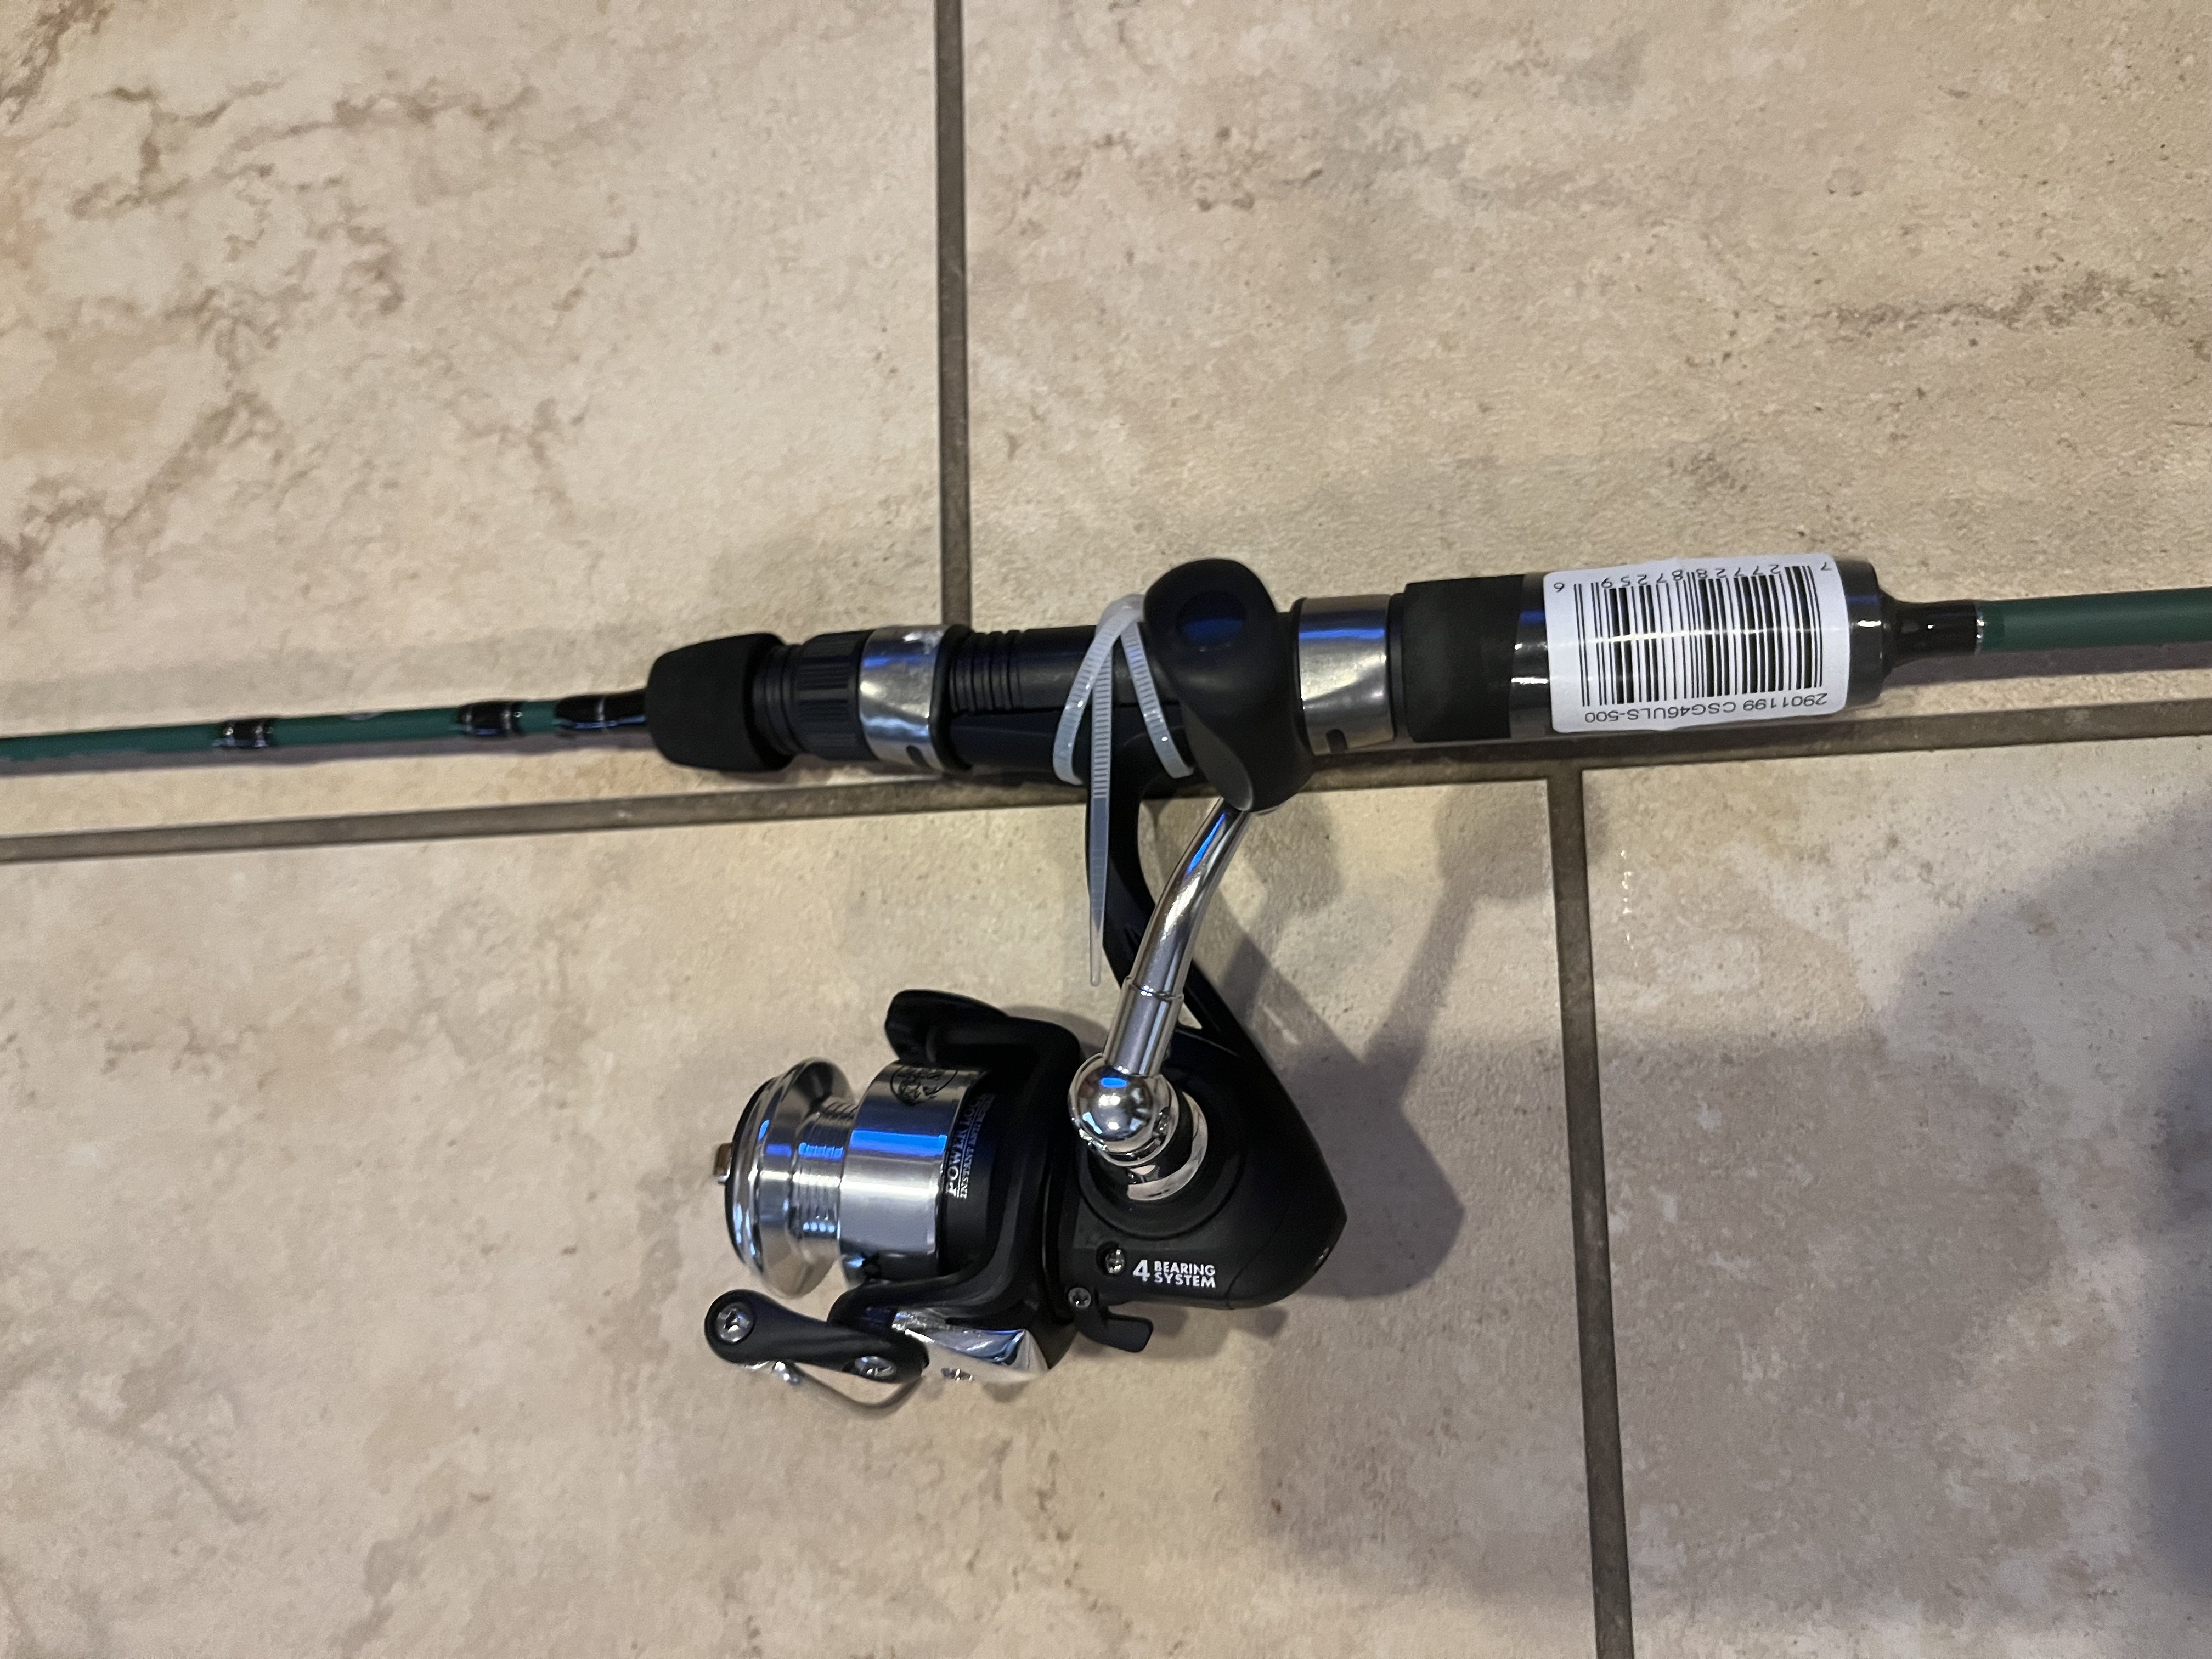 Bass Pro Shop Crappie maxx Spinning Rod and Reel Combo - Classified Ads -   Discussion forum